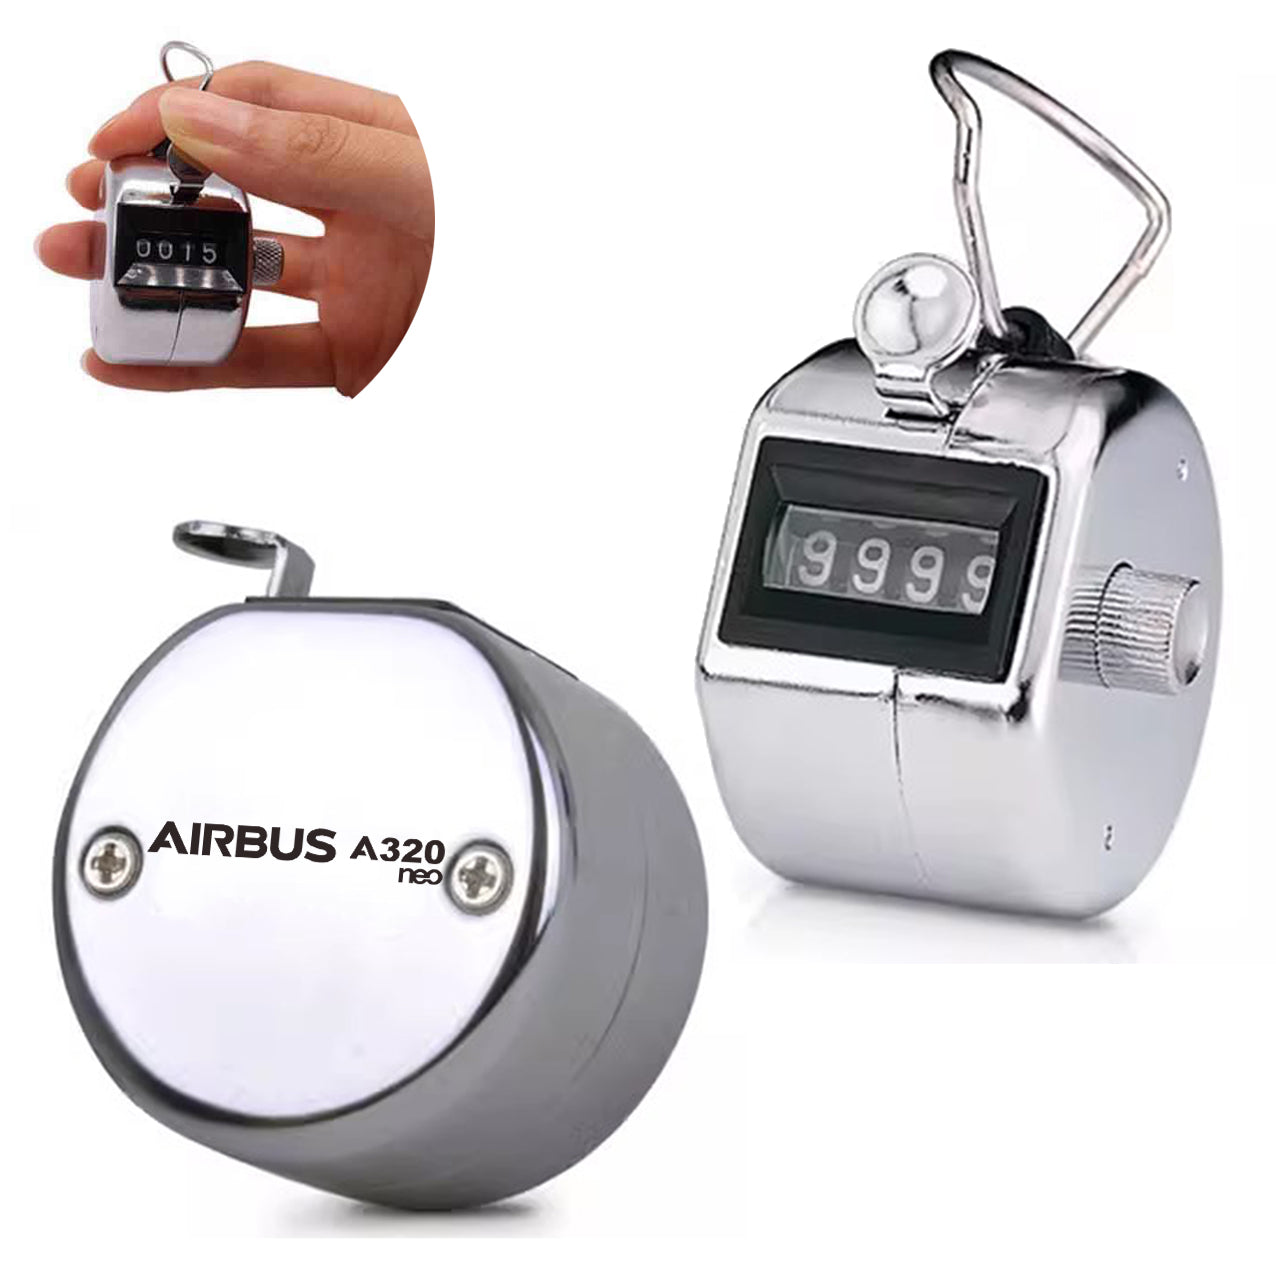 The Airbus A320Neo Designed Metal Handheld Counters